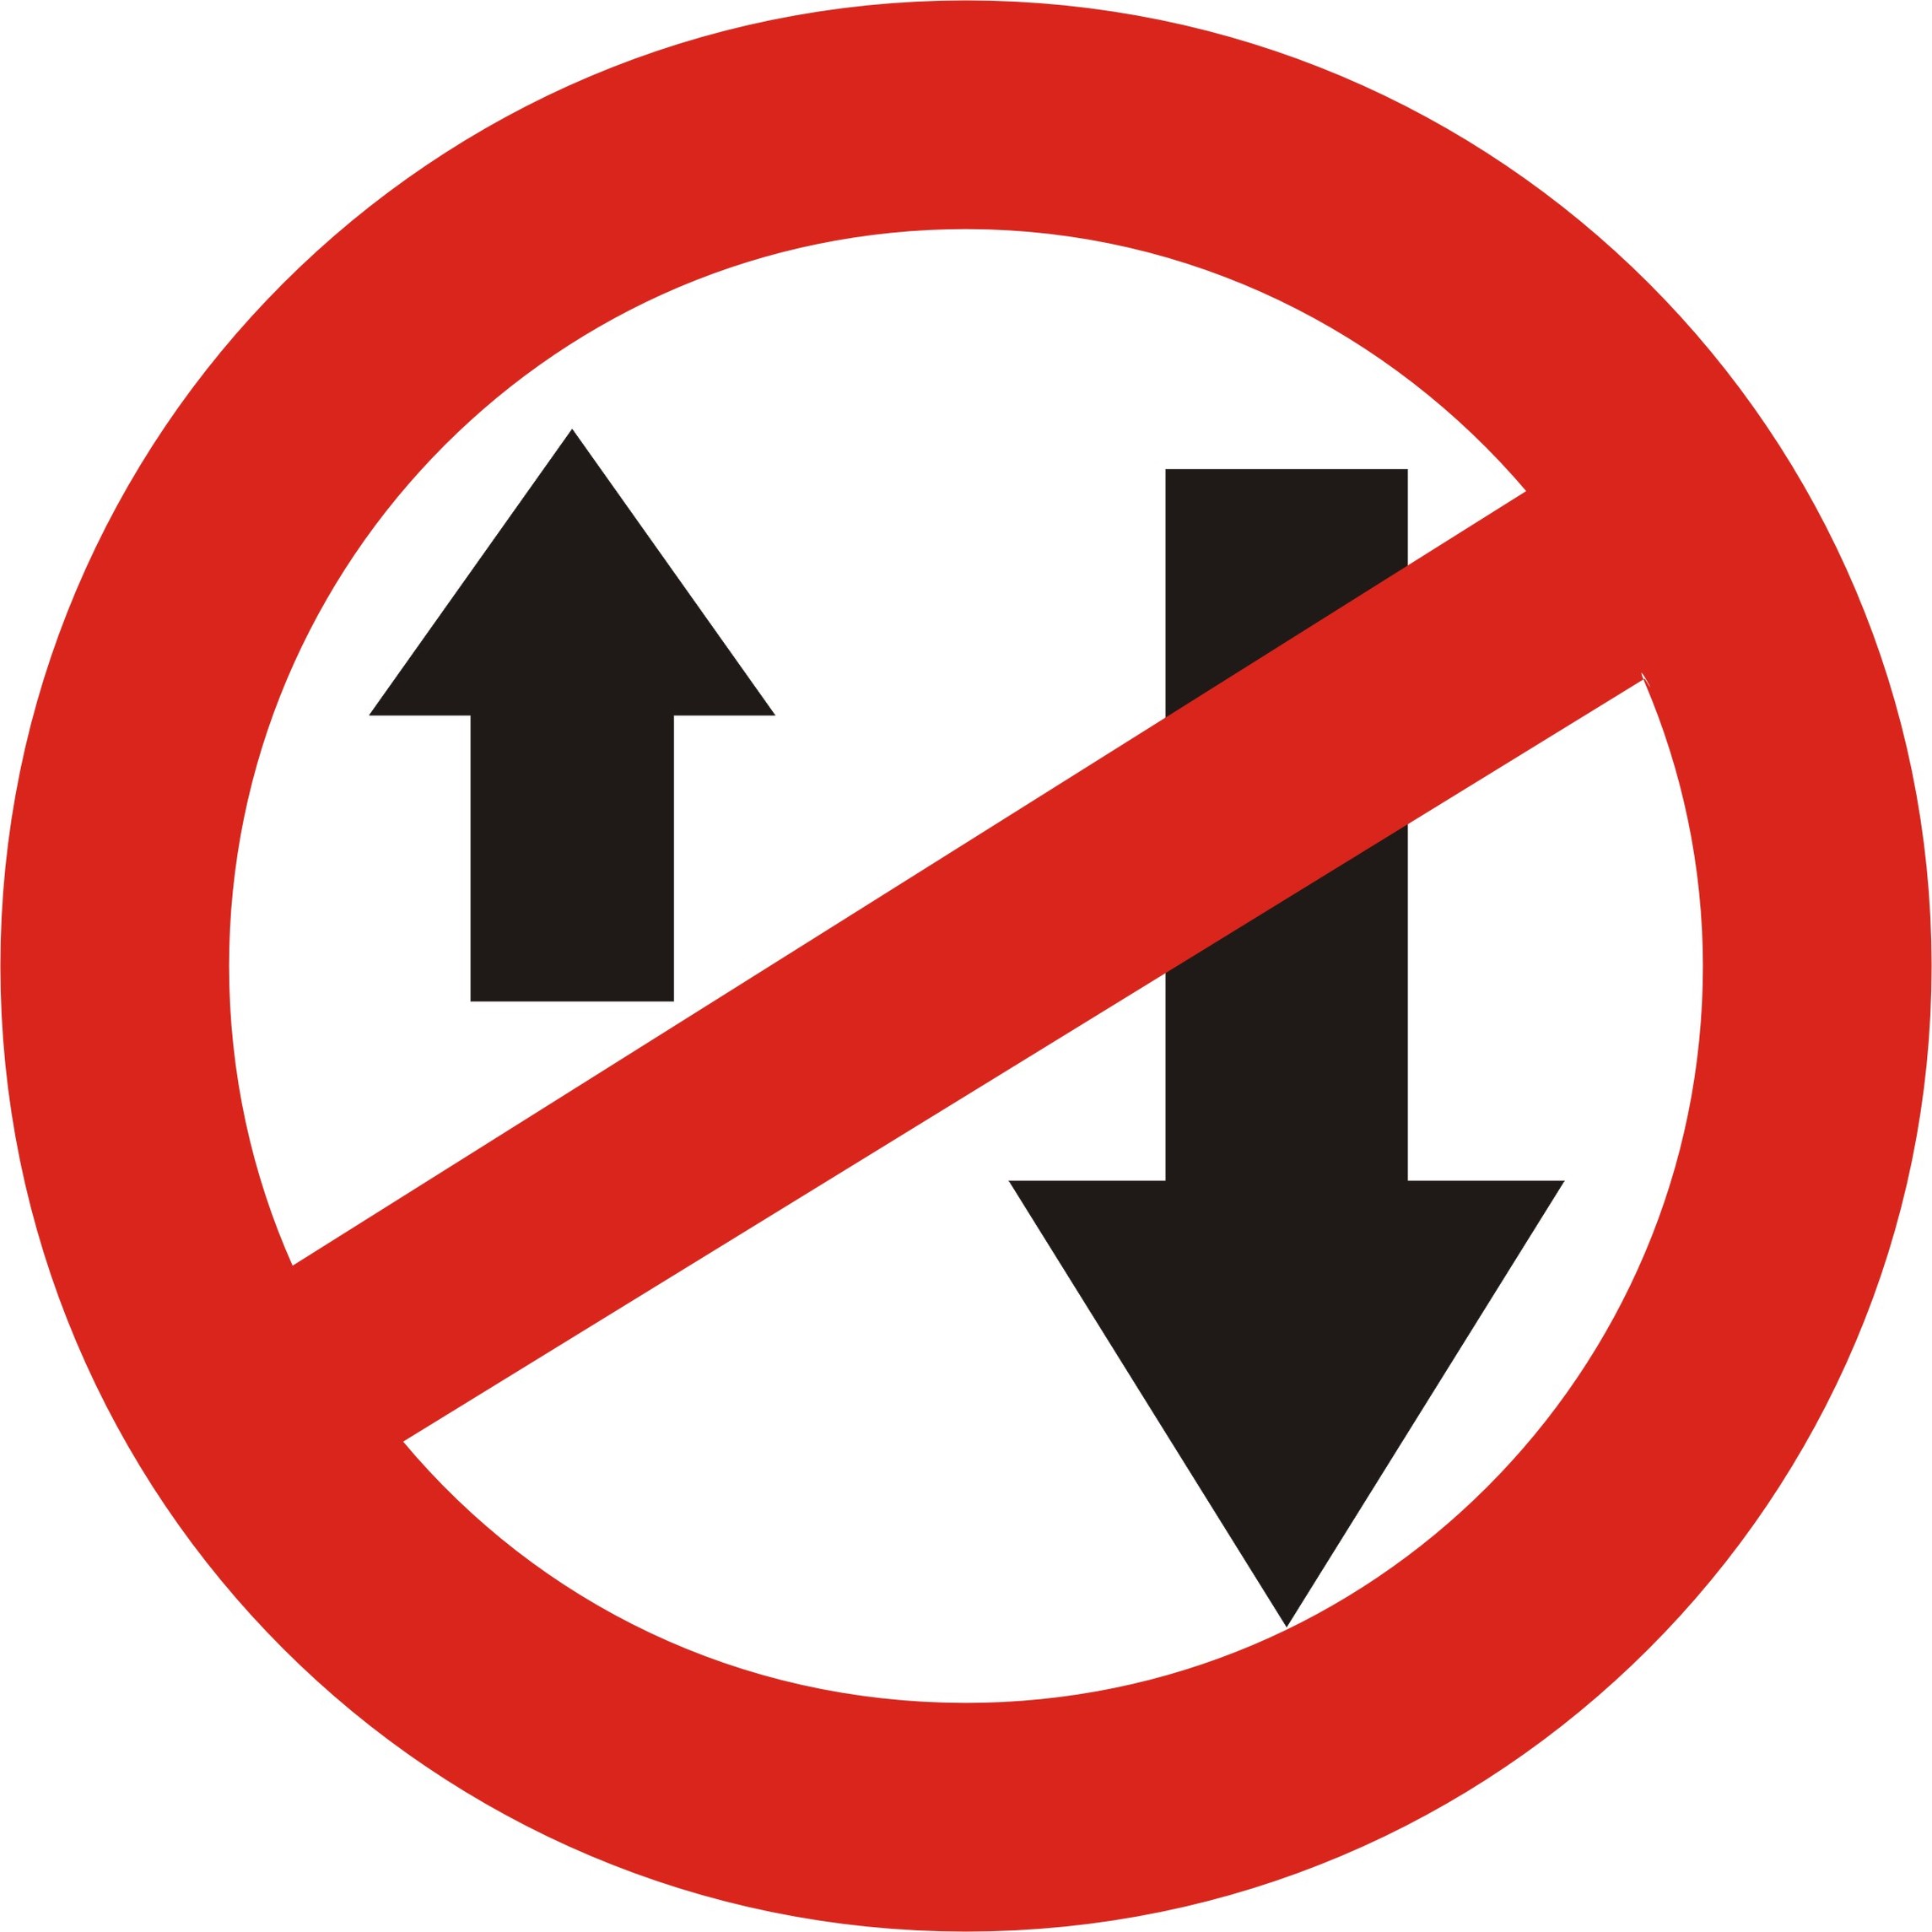 Road Sign No Entry Rightjpg Clipart - Free to use Clip Art Resource